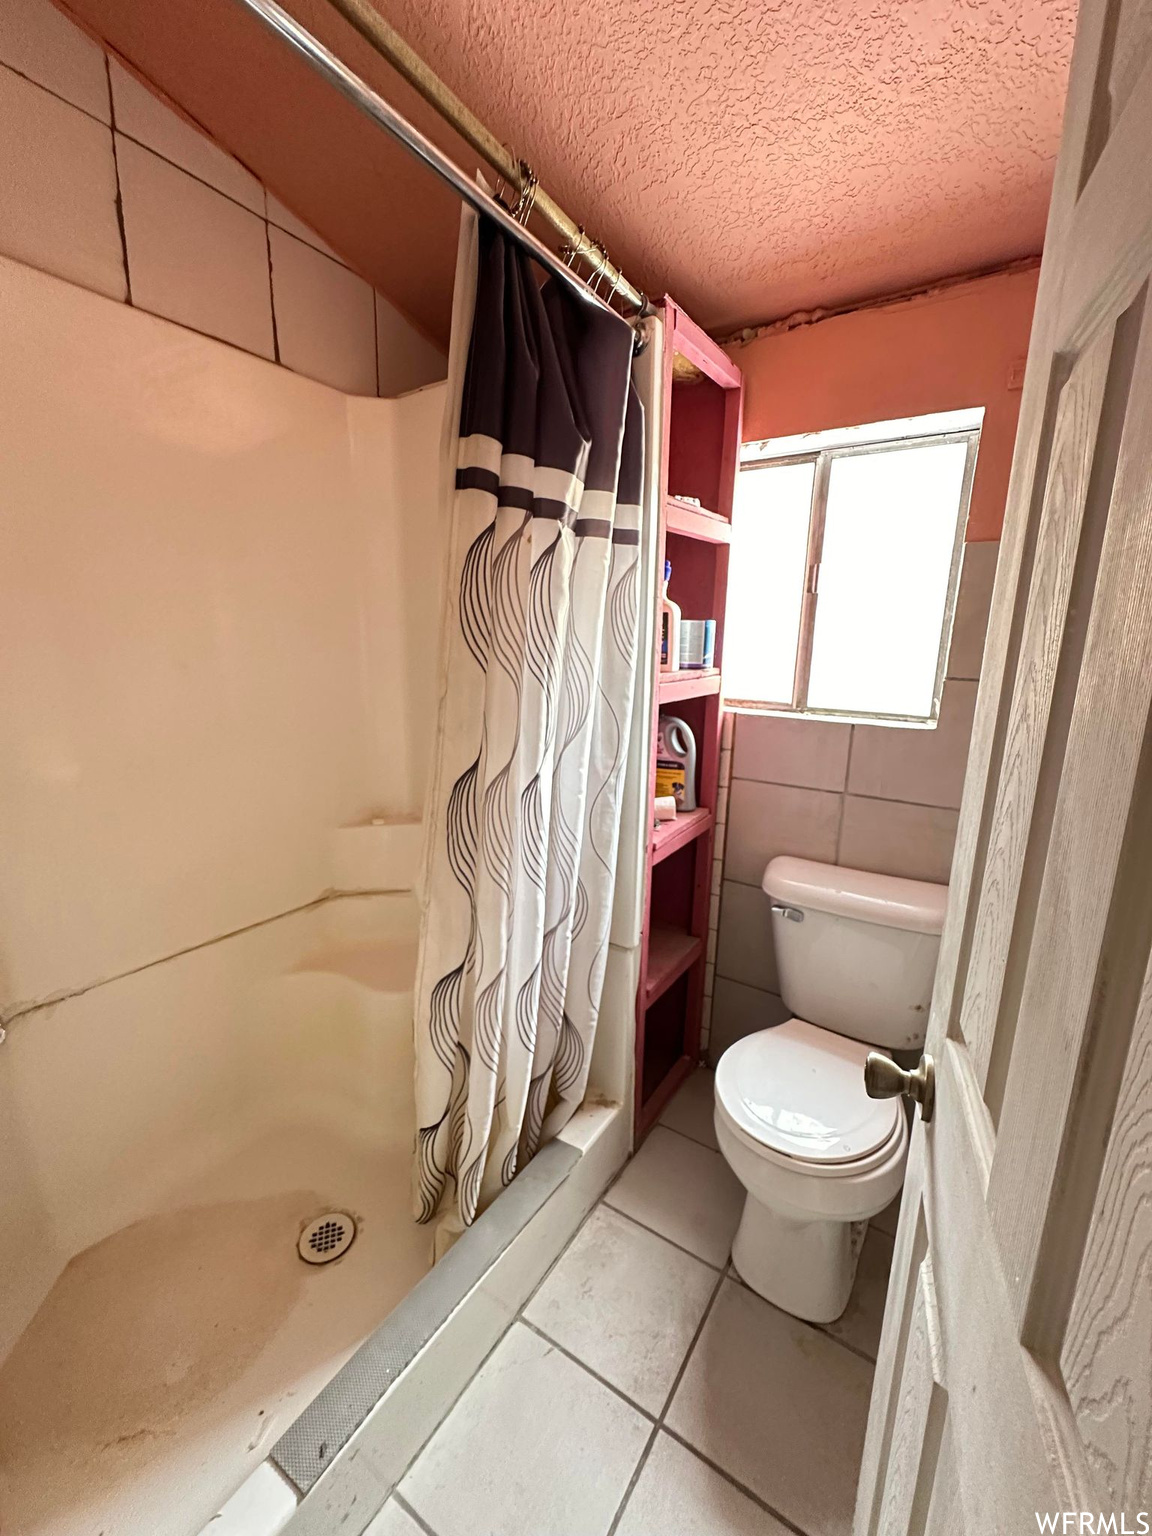 Bathroom with toilet, a shower with curtain, tile walls, a textured ceiling, and tile floors